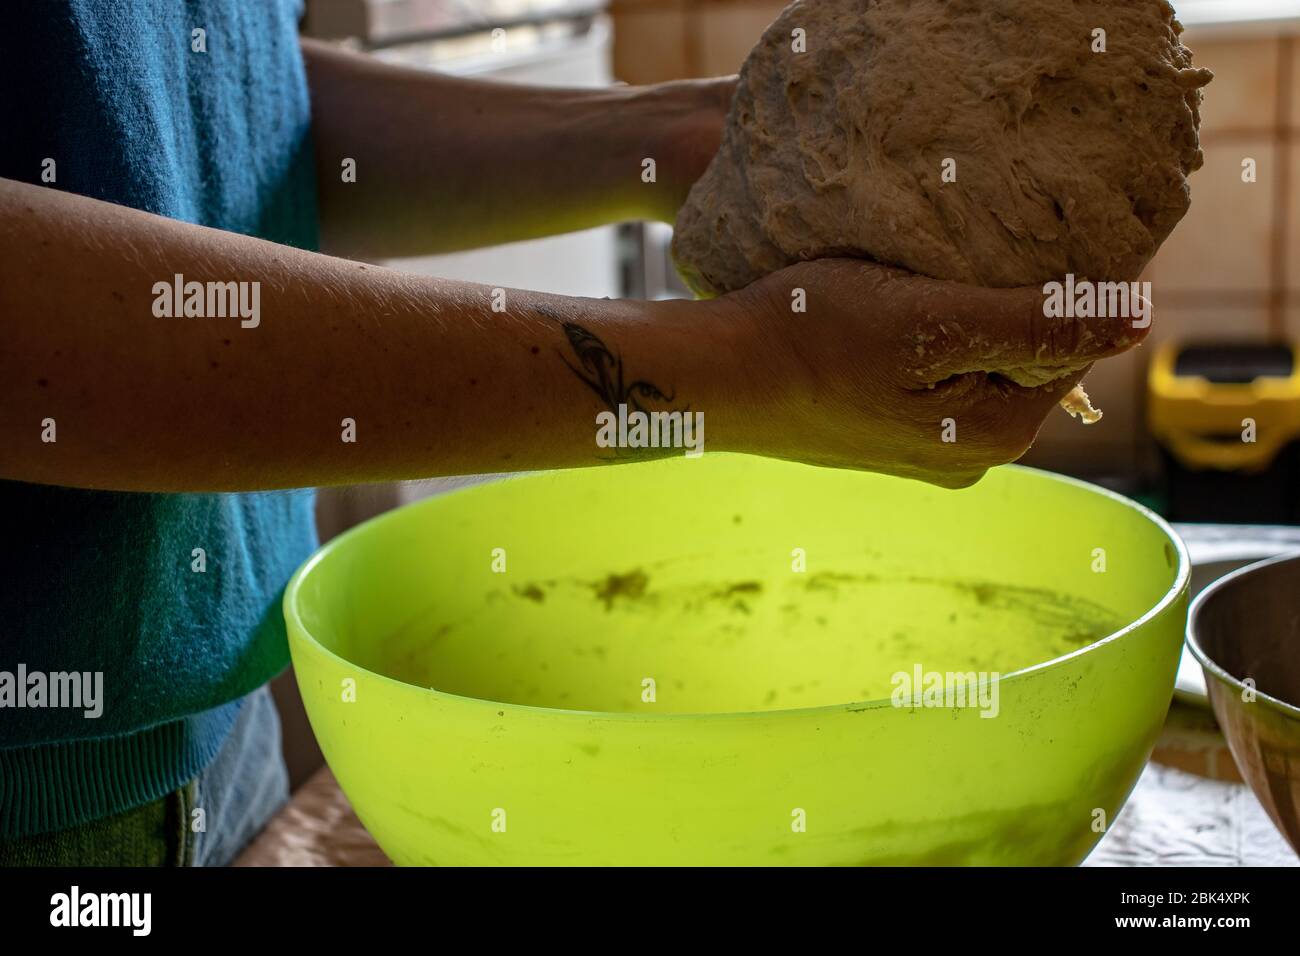 Rome, knead the pizza at home, a soft and slow rising dough. Stock Photo